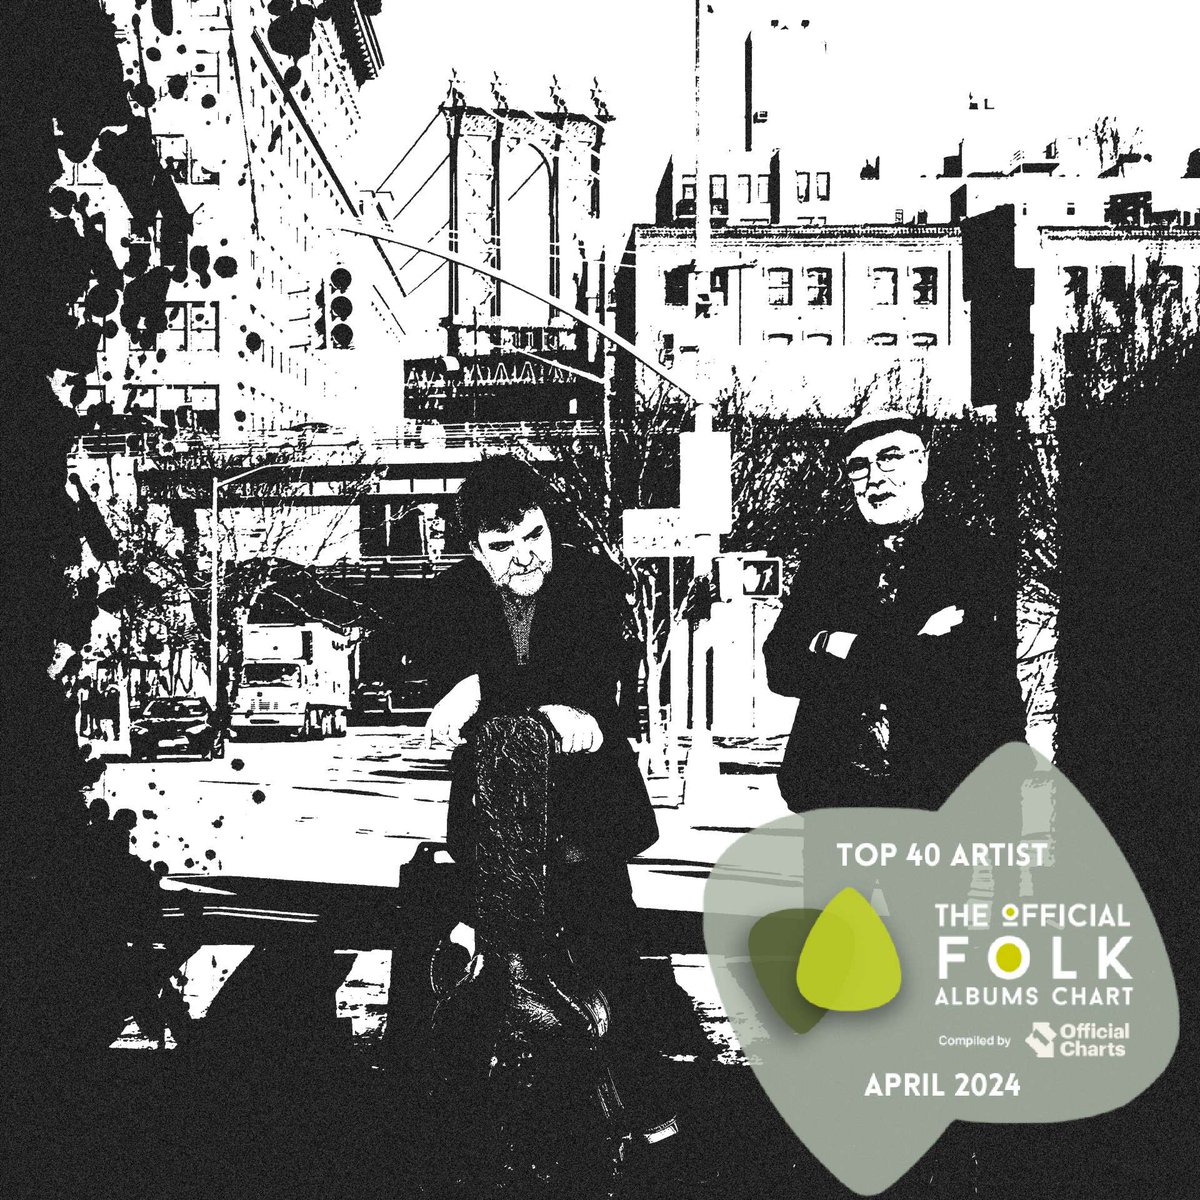 Delighted to find FAR ROCKAWAY is #30 in the official UK Folk Charts - the 5th highest new entry in a month filled with fantastic folk artists. Not bad for a lockdown project! philodgers.bandcamp.com/album/far-rock… @officialcharts @soundrootsuk #folkchart #englishfolkexpo